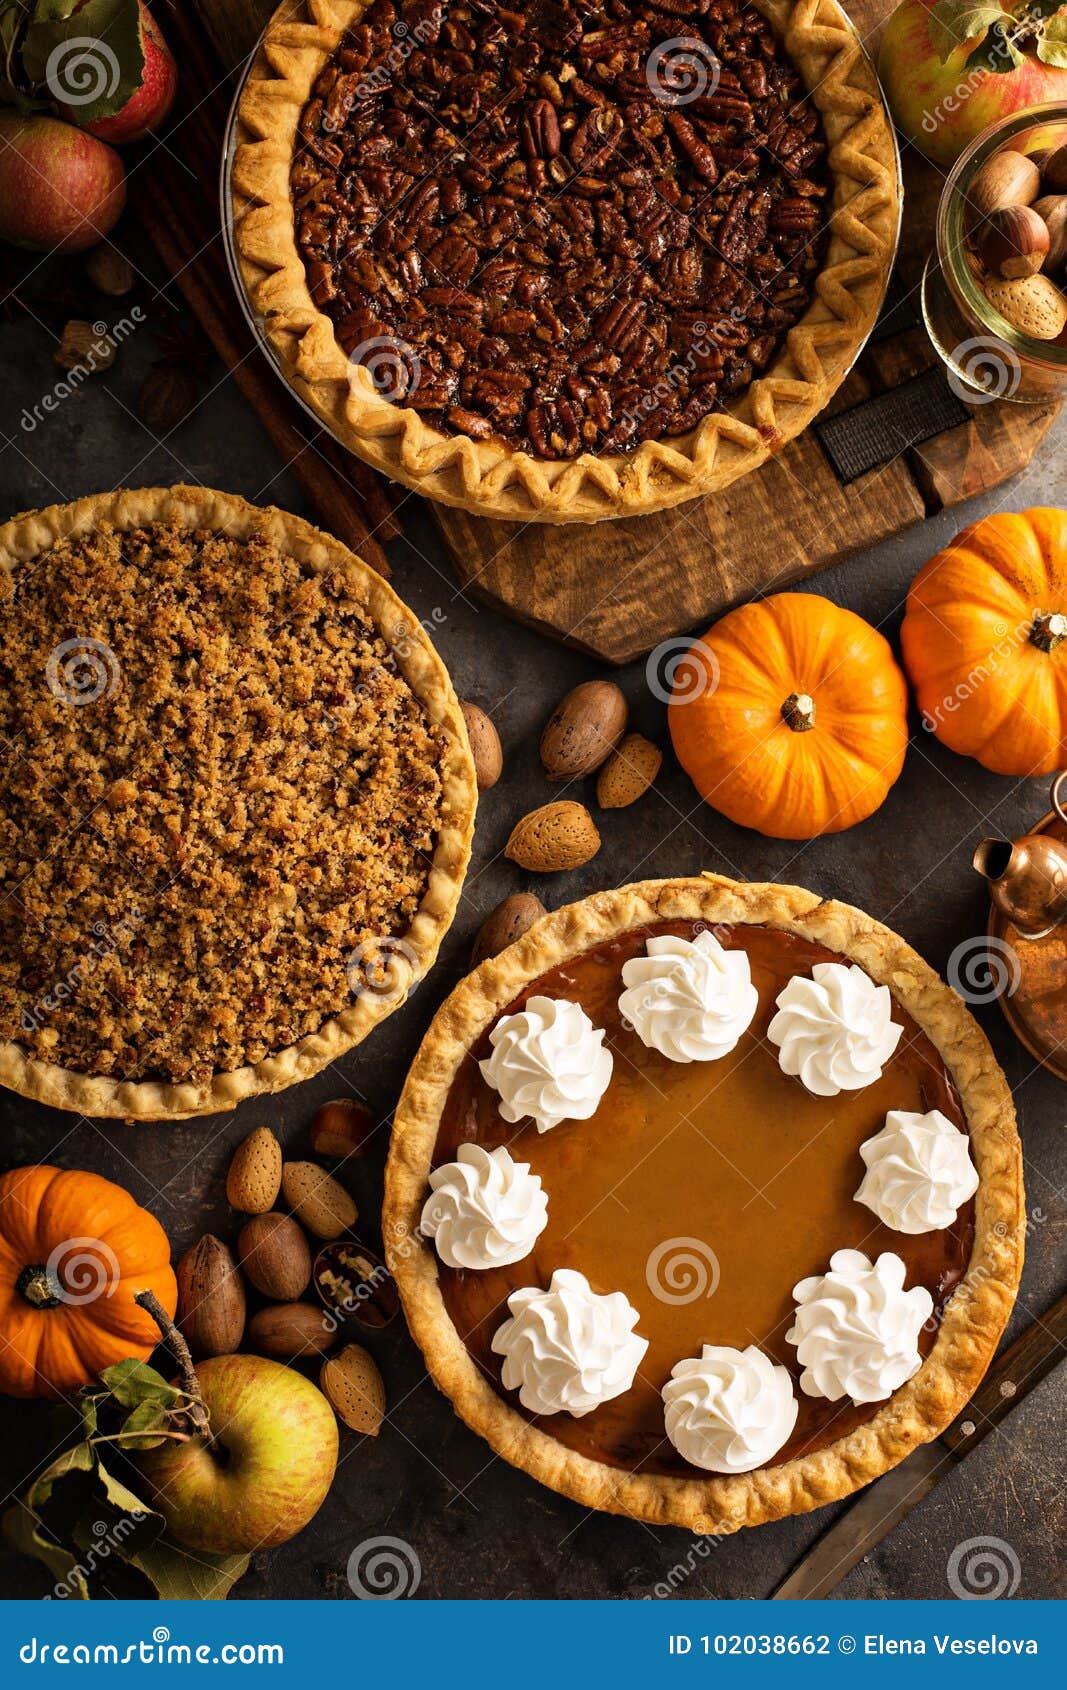 fall traditional pies pumpkin, pecan and apple crumble